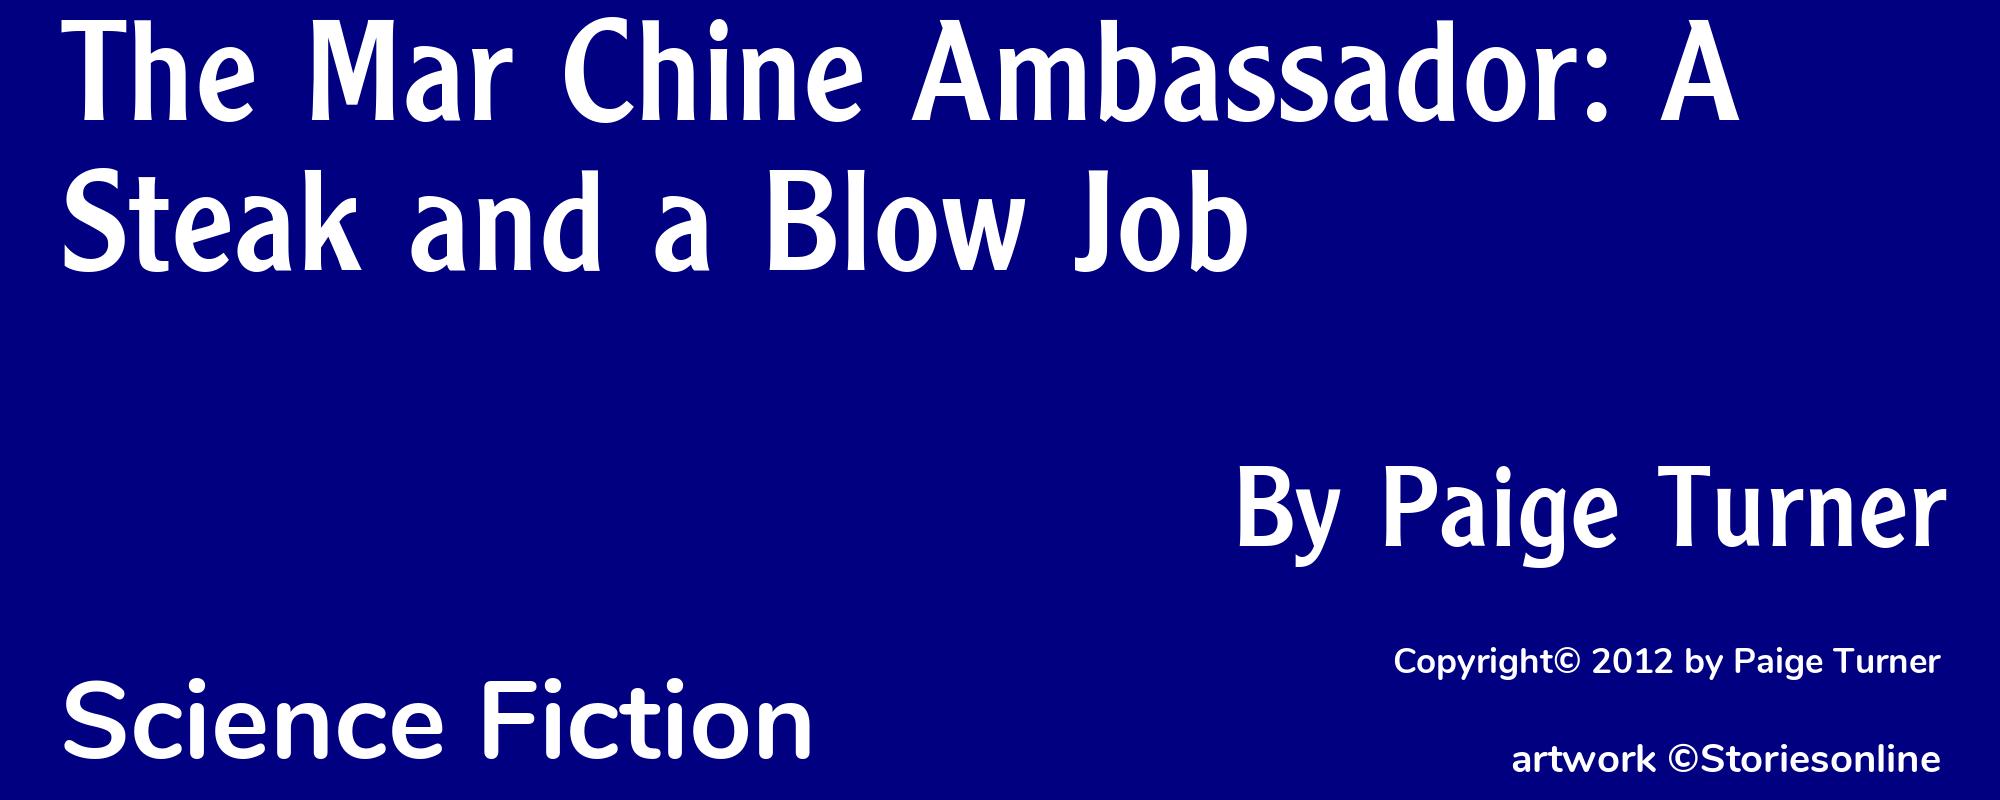 The Mar Chine Ambassador: A Steak and a Blow Job - Cover